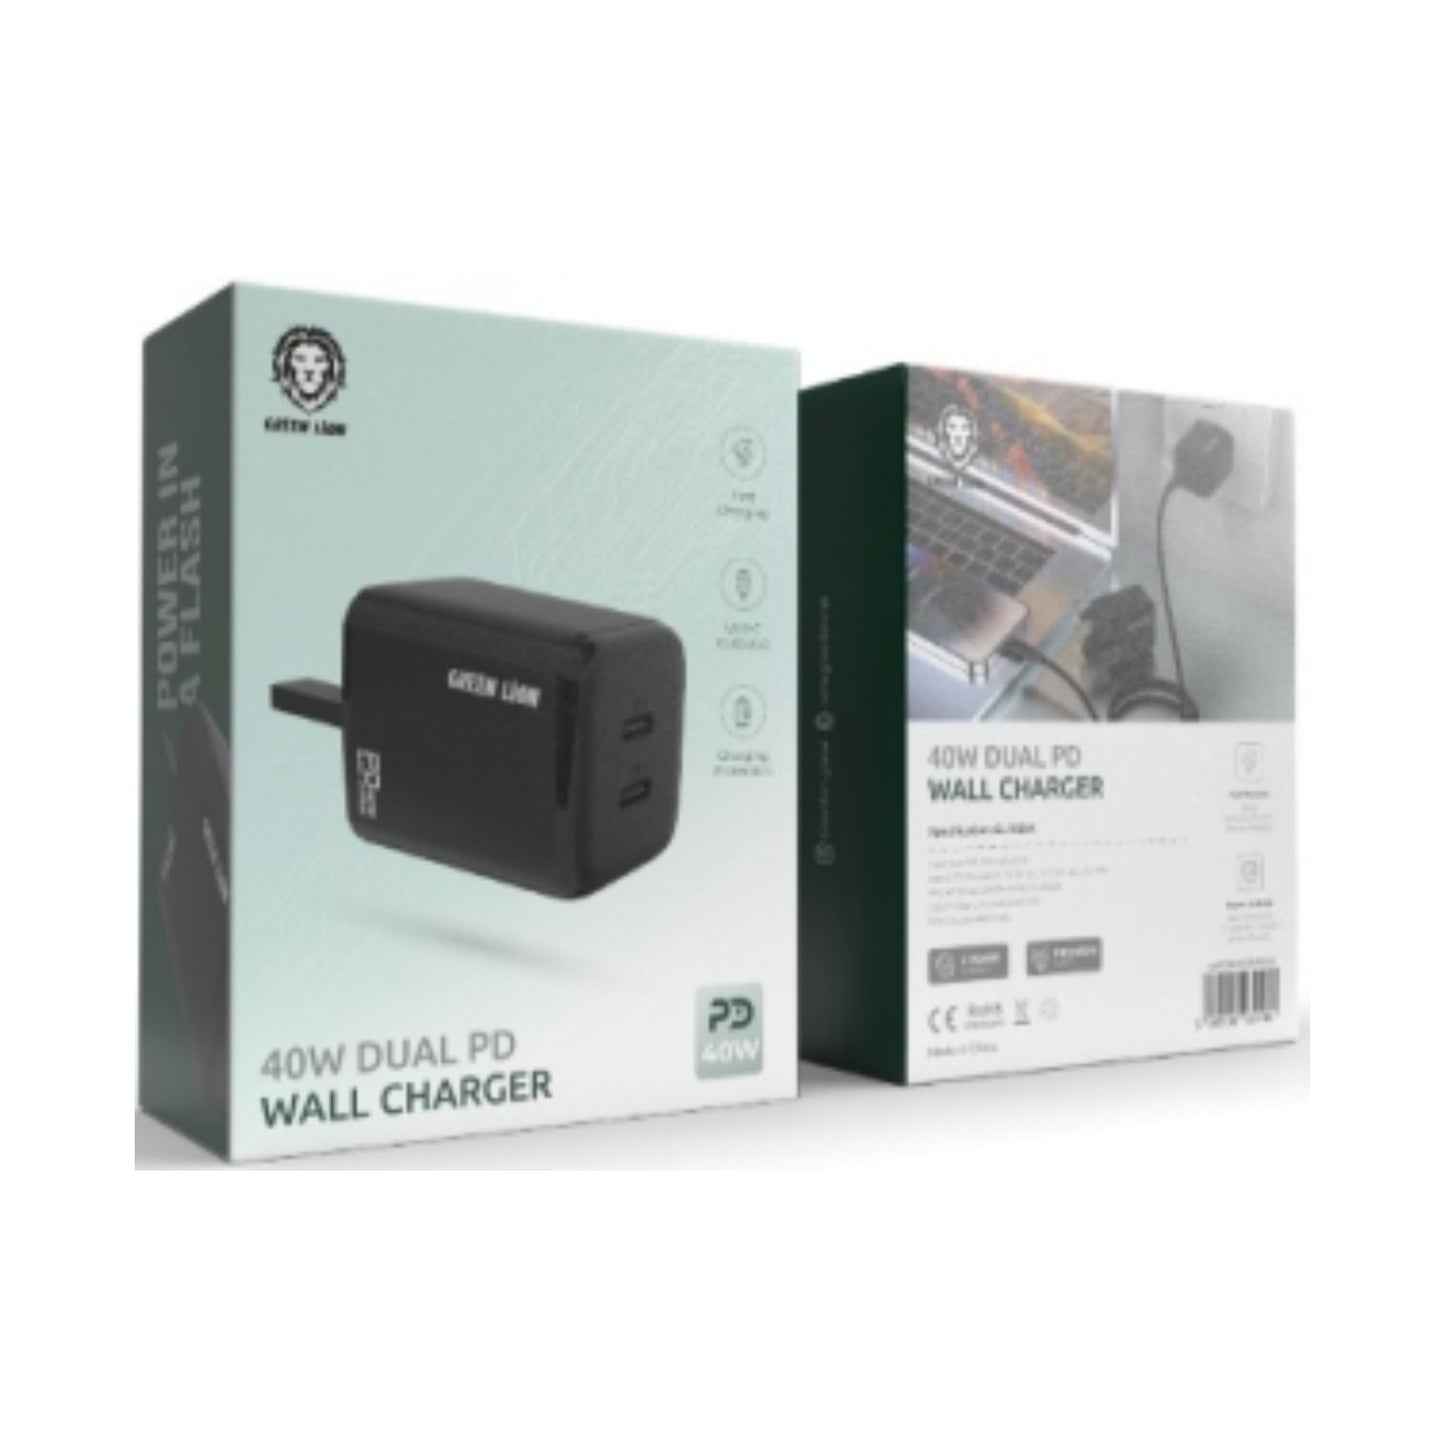 Green Lion 40W Dual PD Wall Charger UK_Black